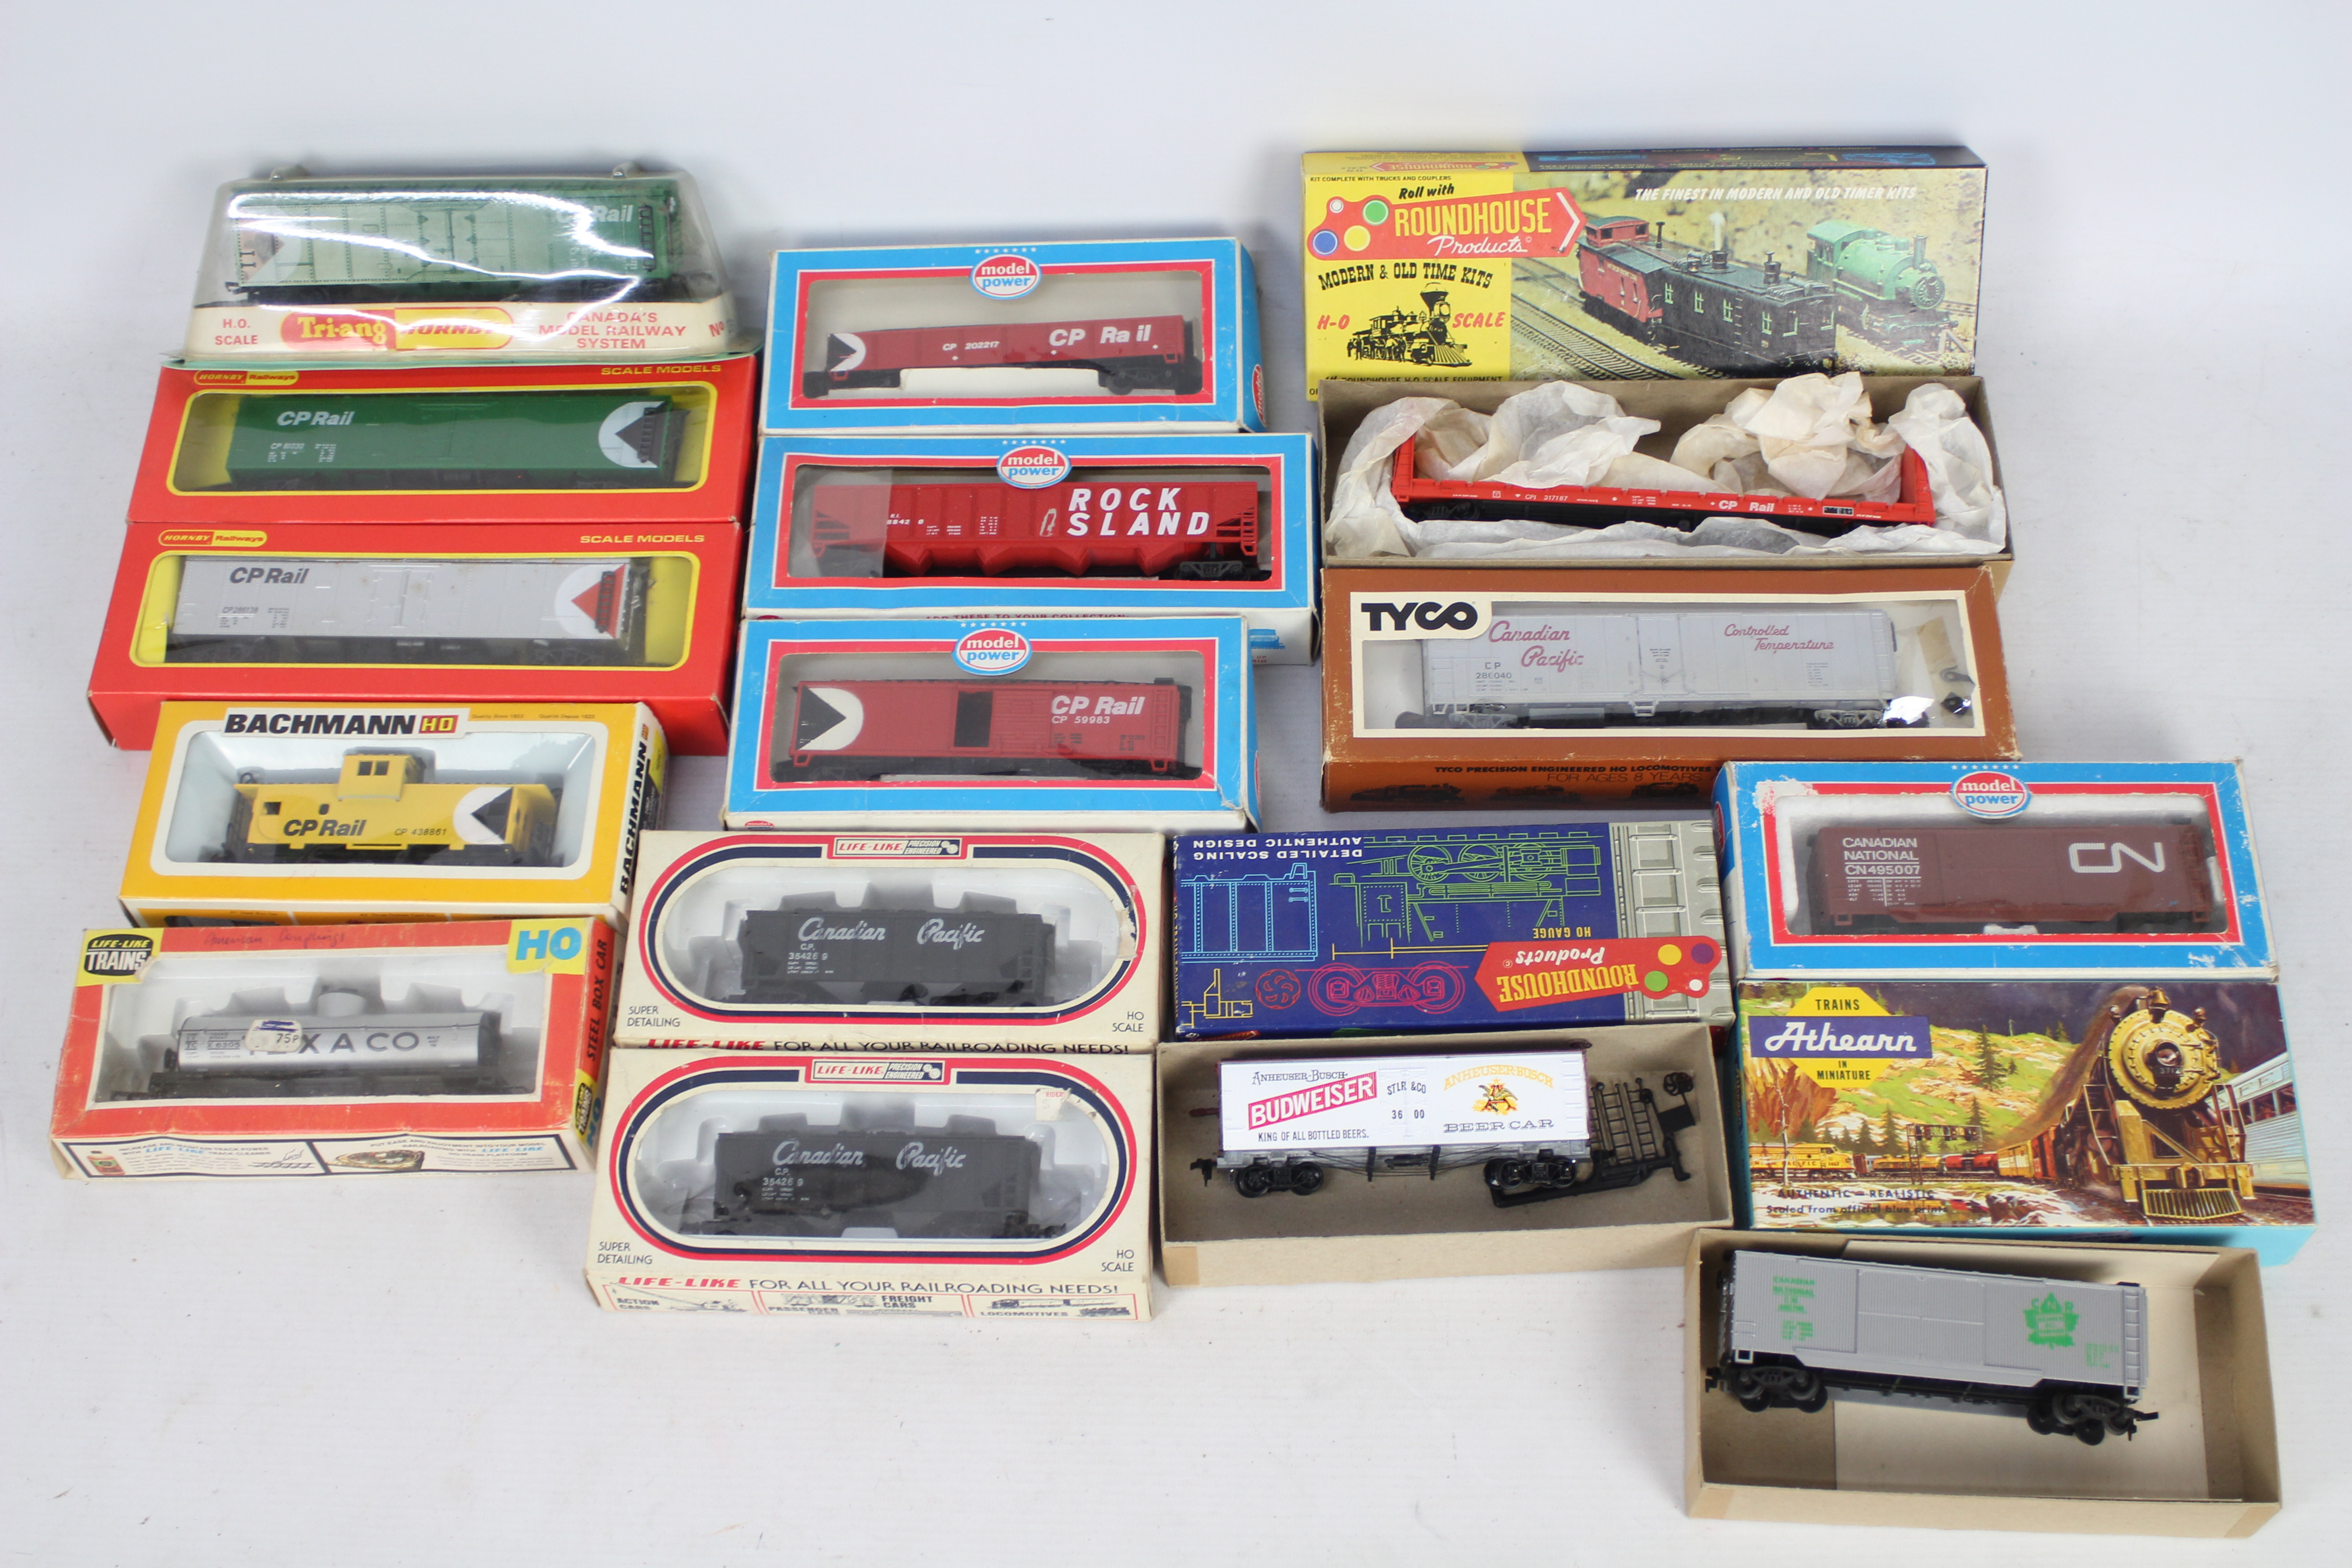 Bachmann - Hornby - Roundhouse - 15 x HO Gauge wagons mostly in CP Rail livery including 50 foot